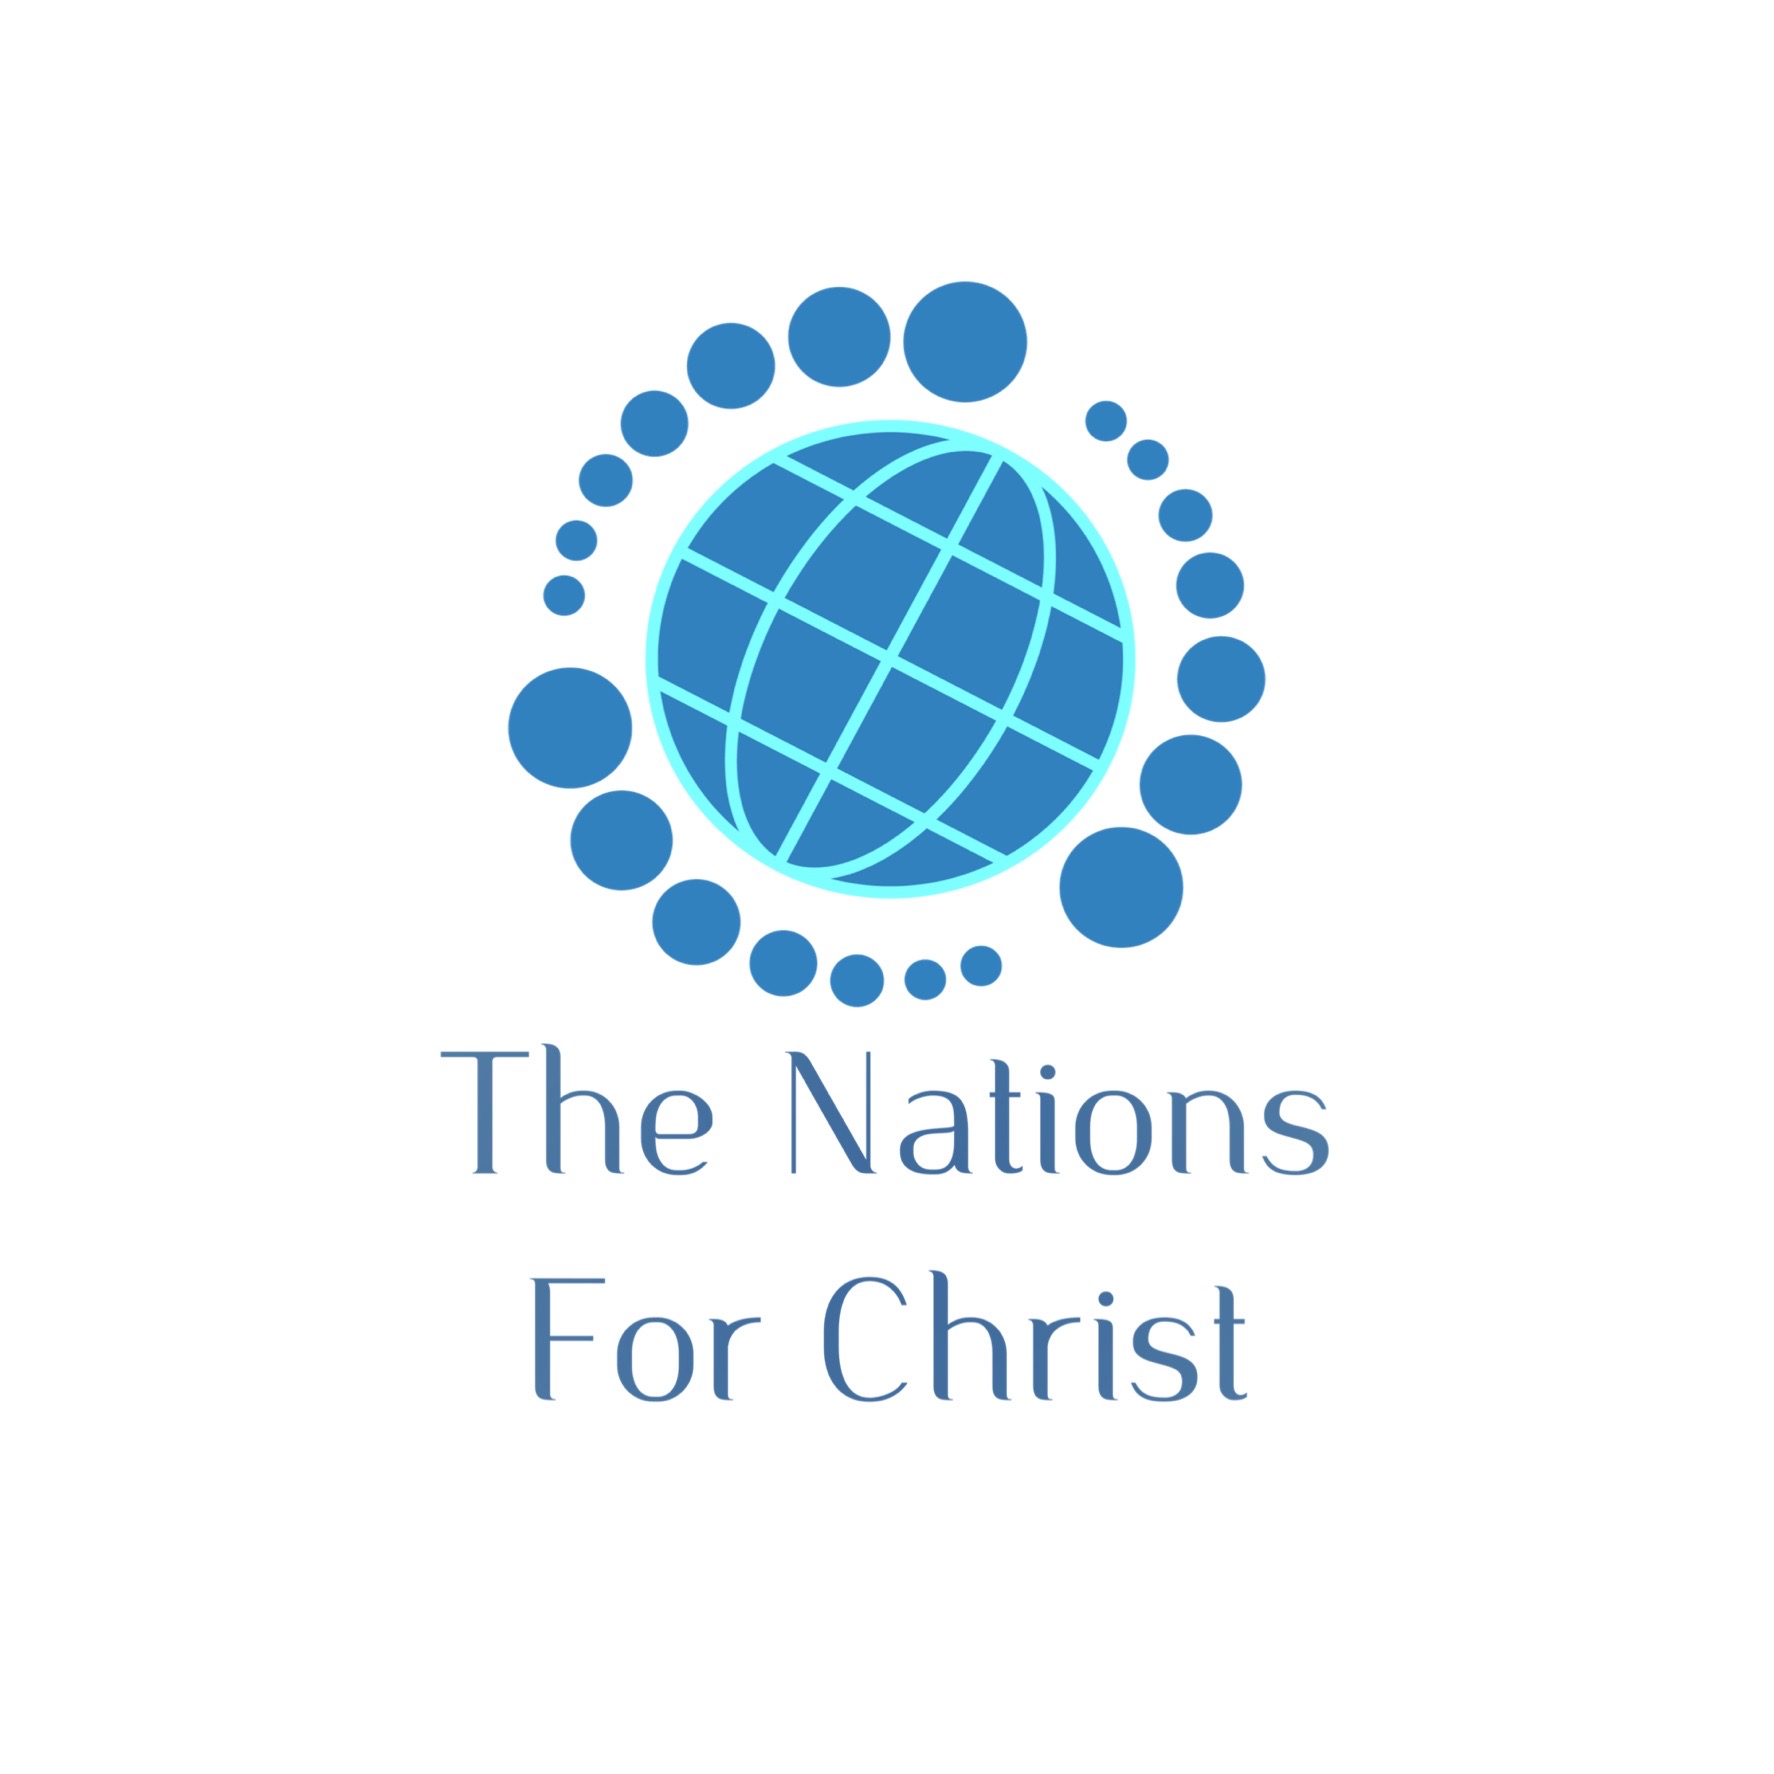 The Nations for Christ